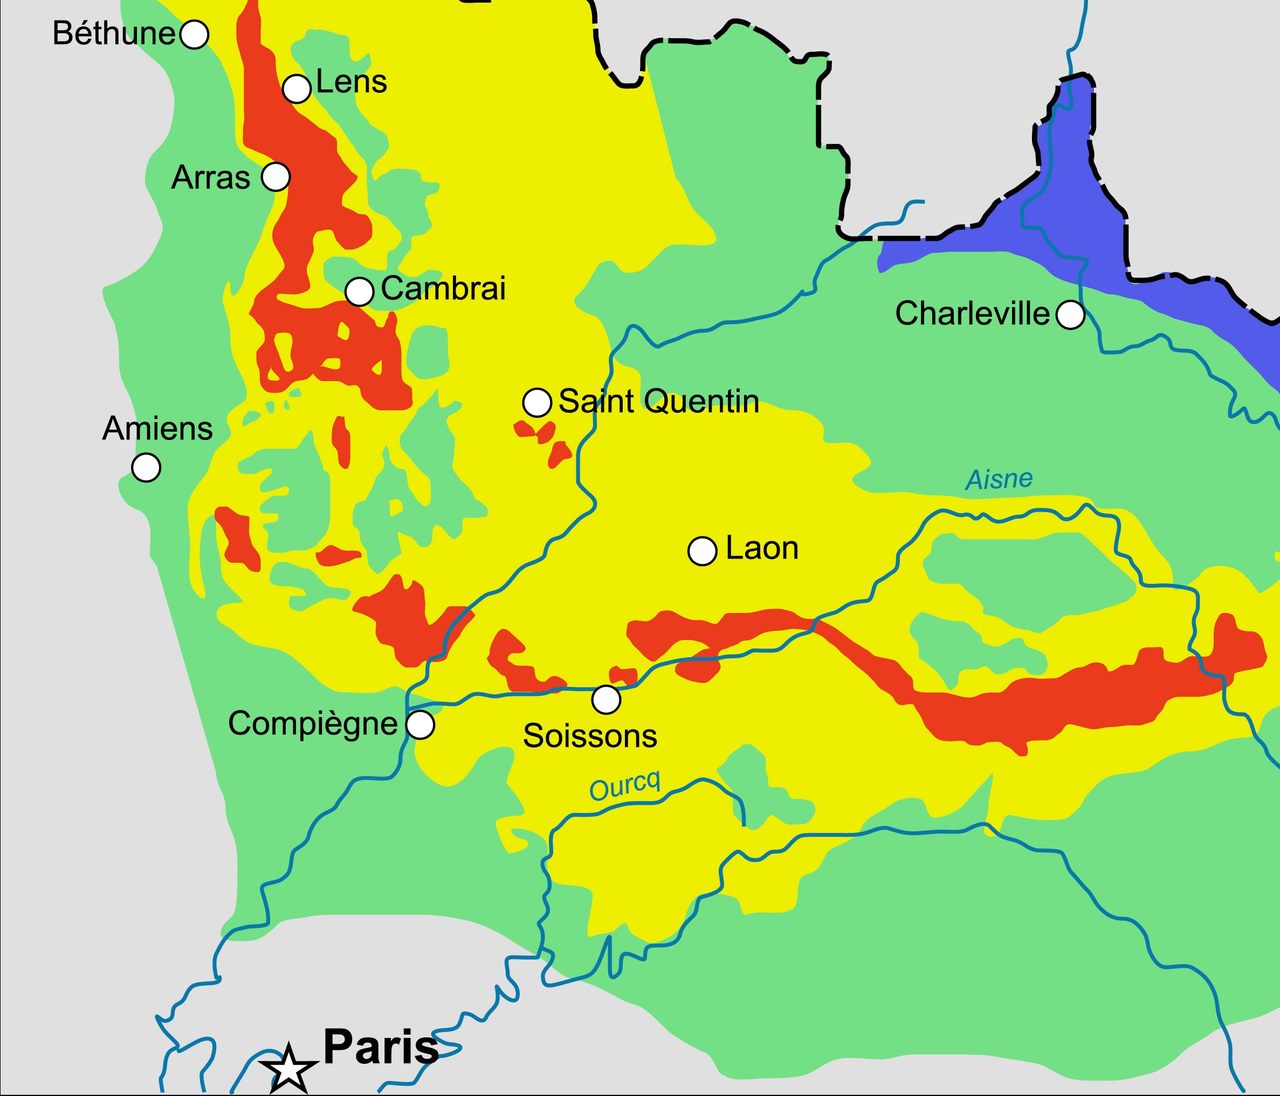 Swaths of toxic land the size of Paris still cover much of France.